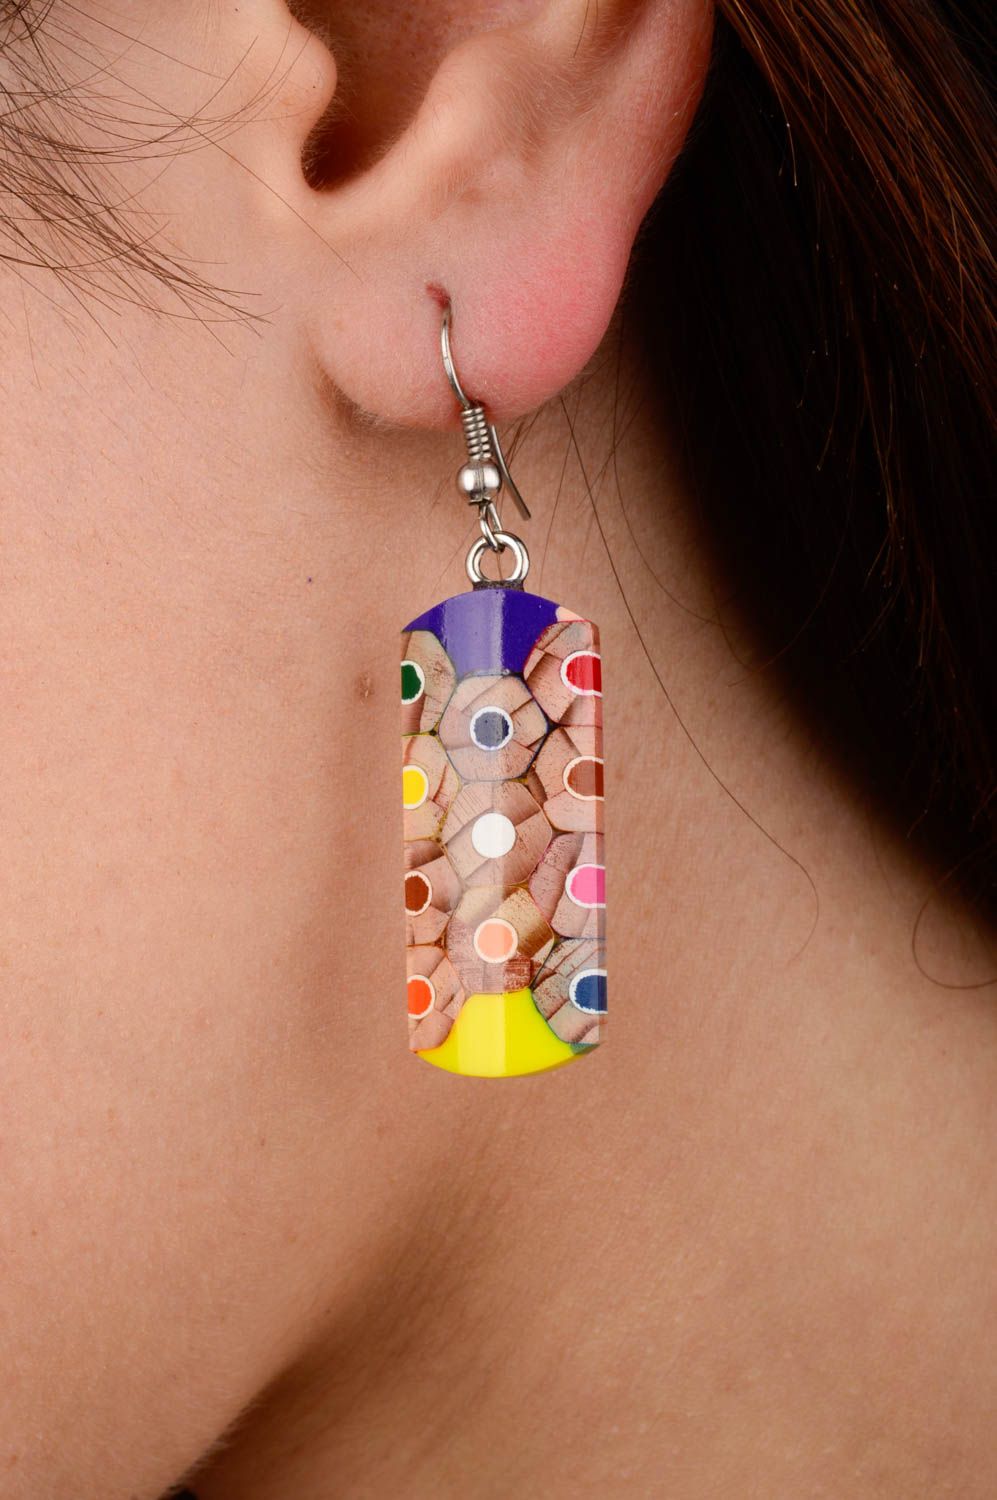 Cool earrings handcrafted jewelry fashion accessories dangling earrings photo 2